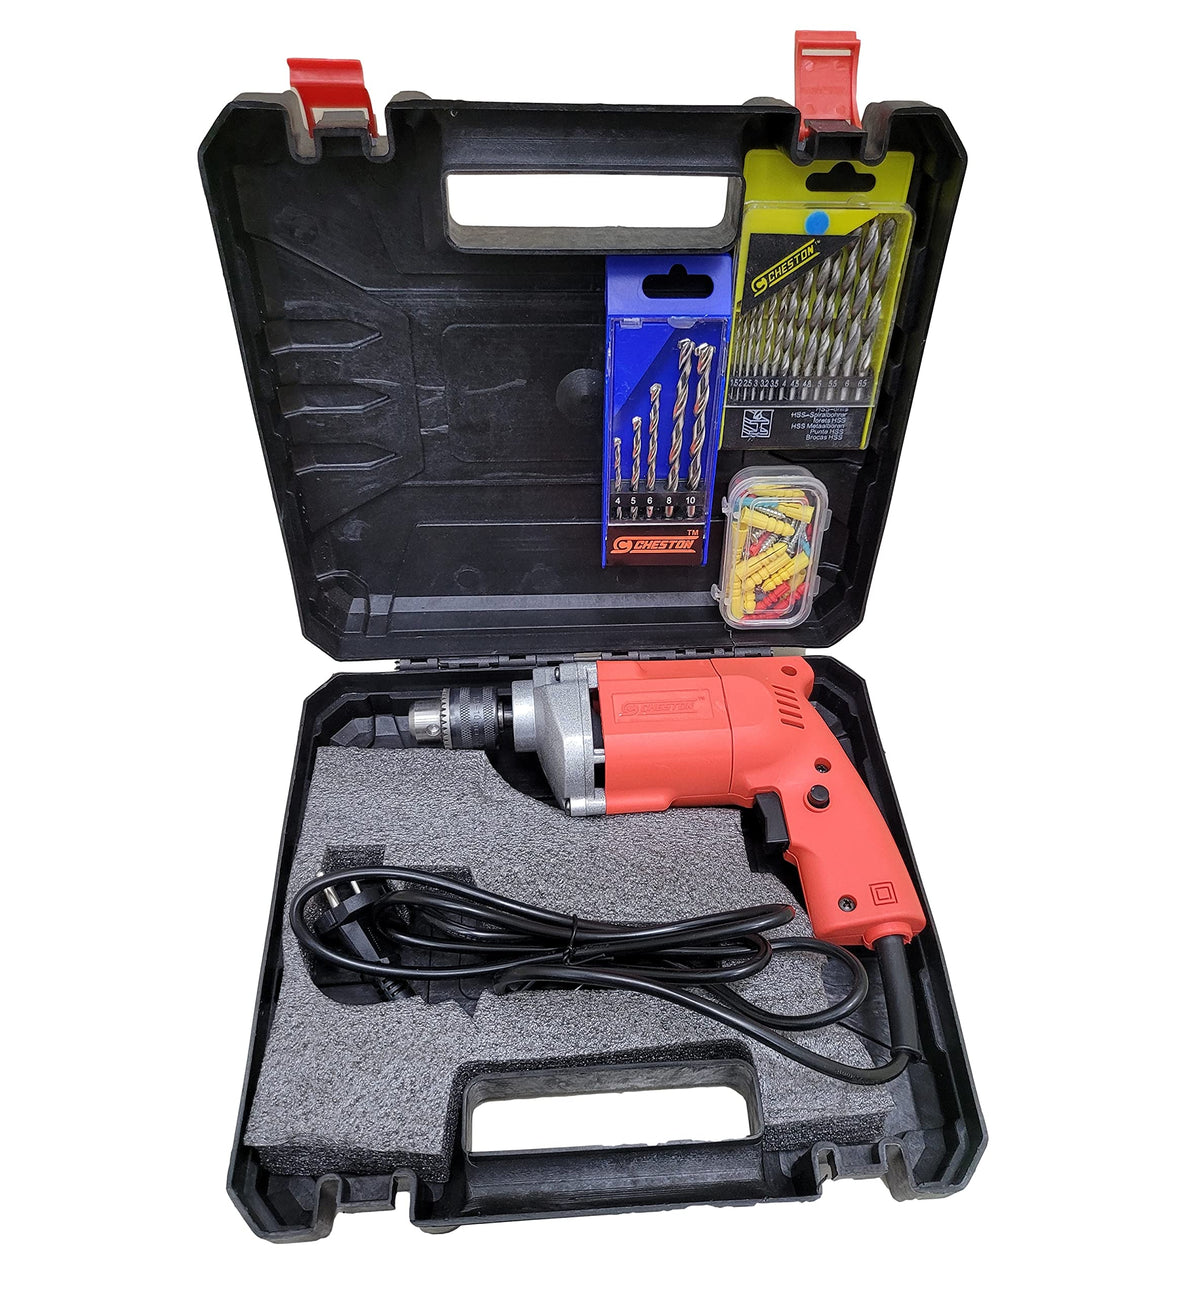 Cheston 10mm Powerful Drill Machine Kit for Wall, Metal, Wood Drilling with 78 Accessories in Tool Box Case